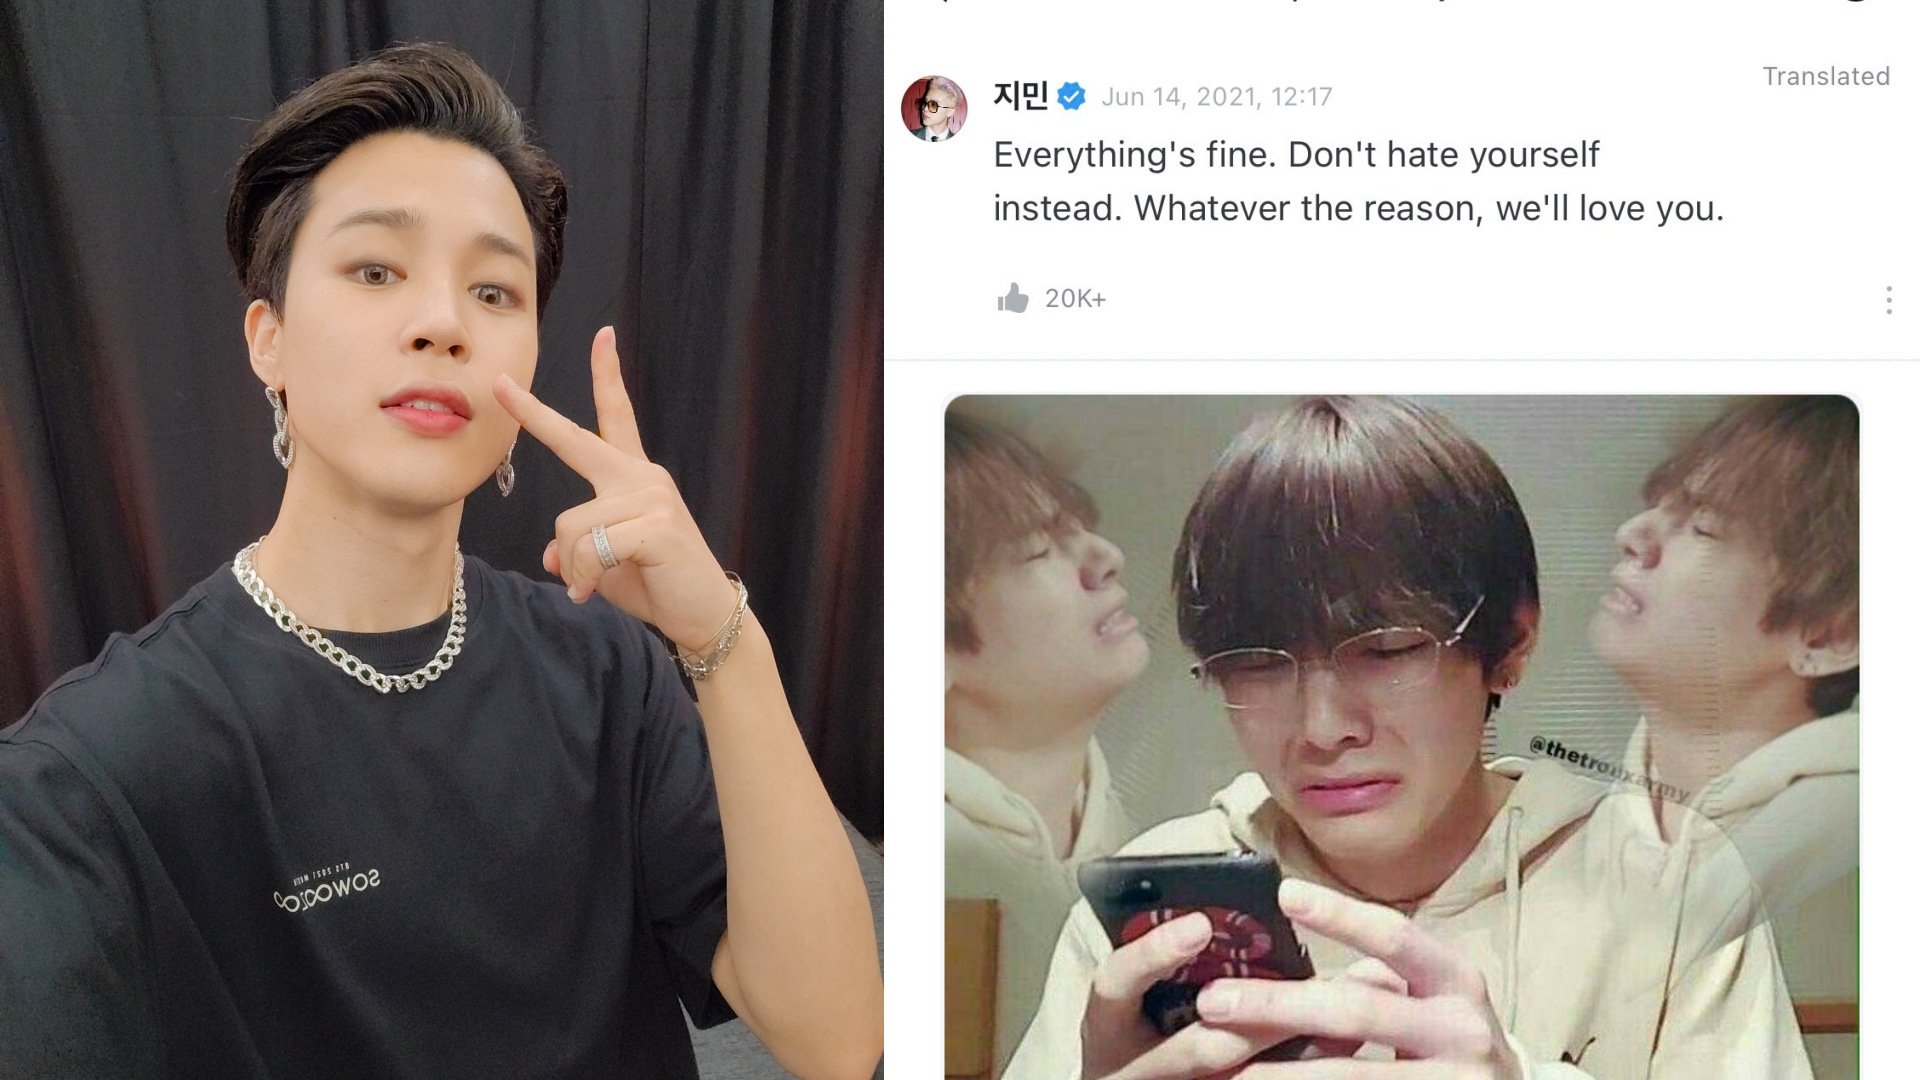 You Are Not Alone”: BTS' Jimin Comforts Fan Going Through A Tough